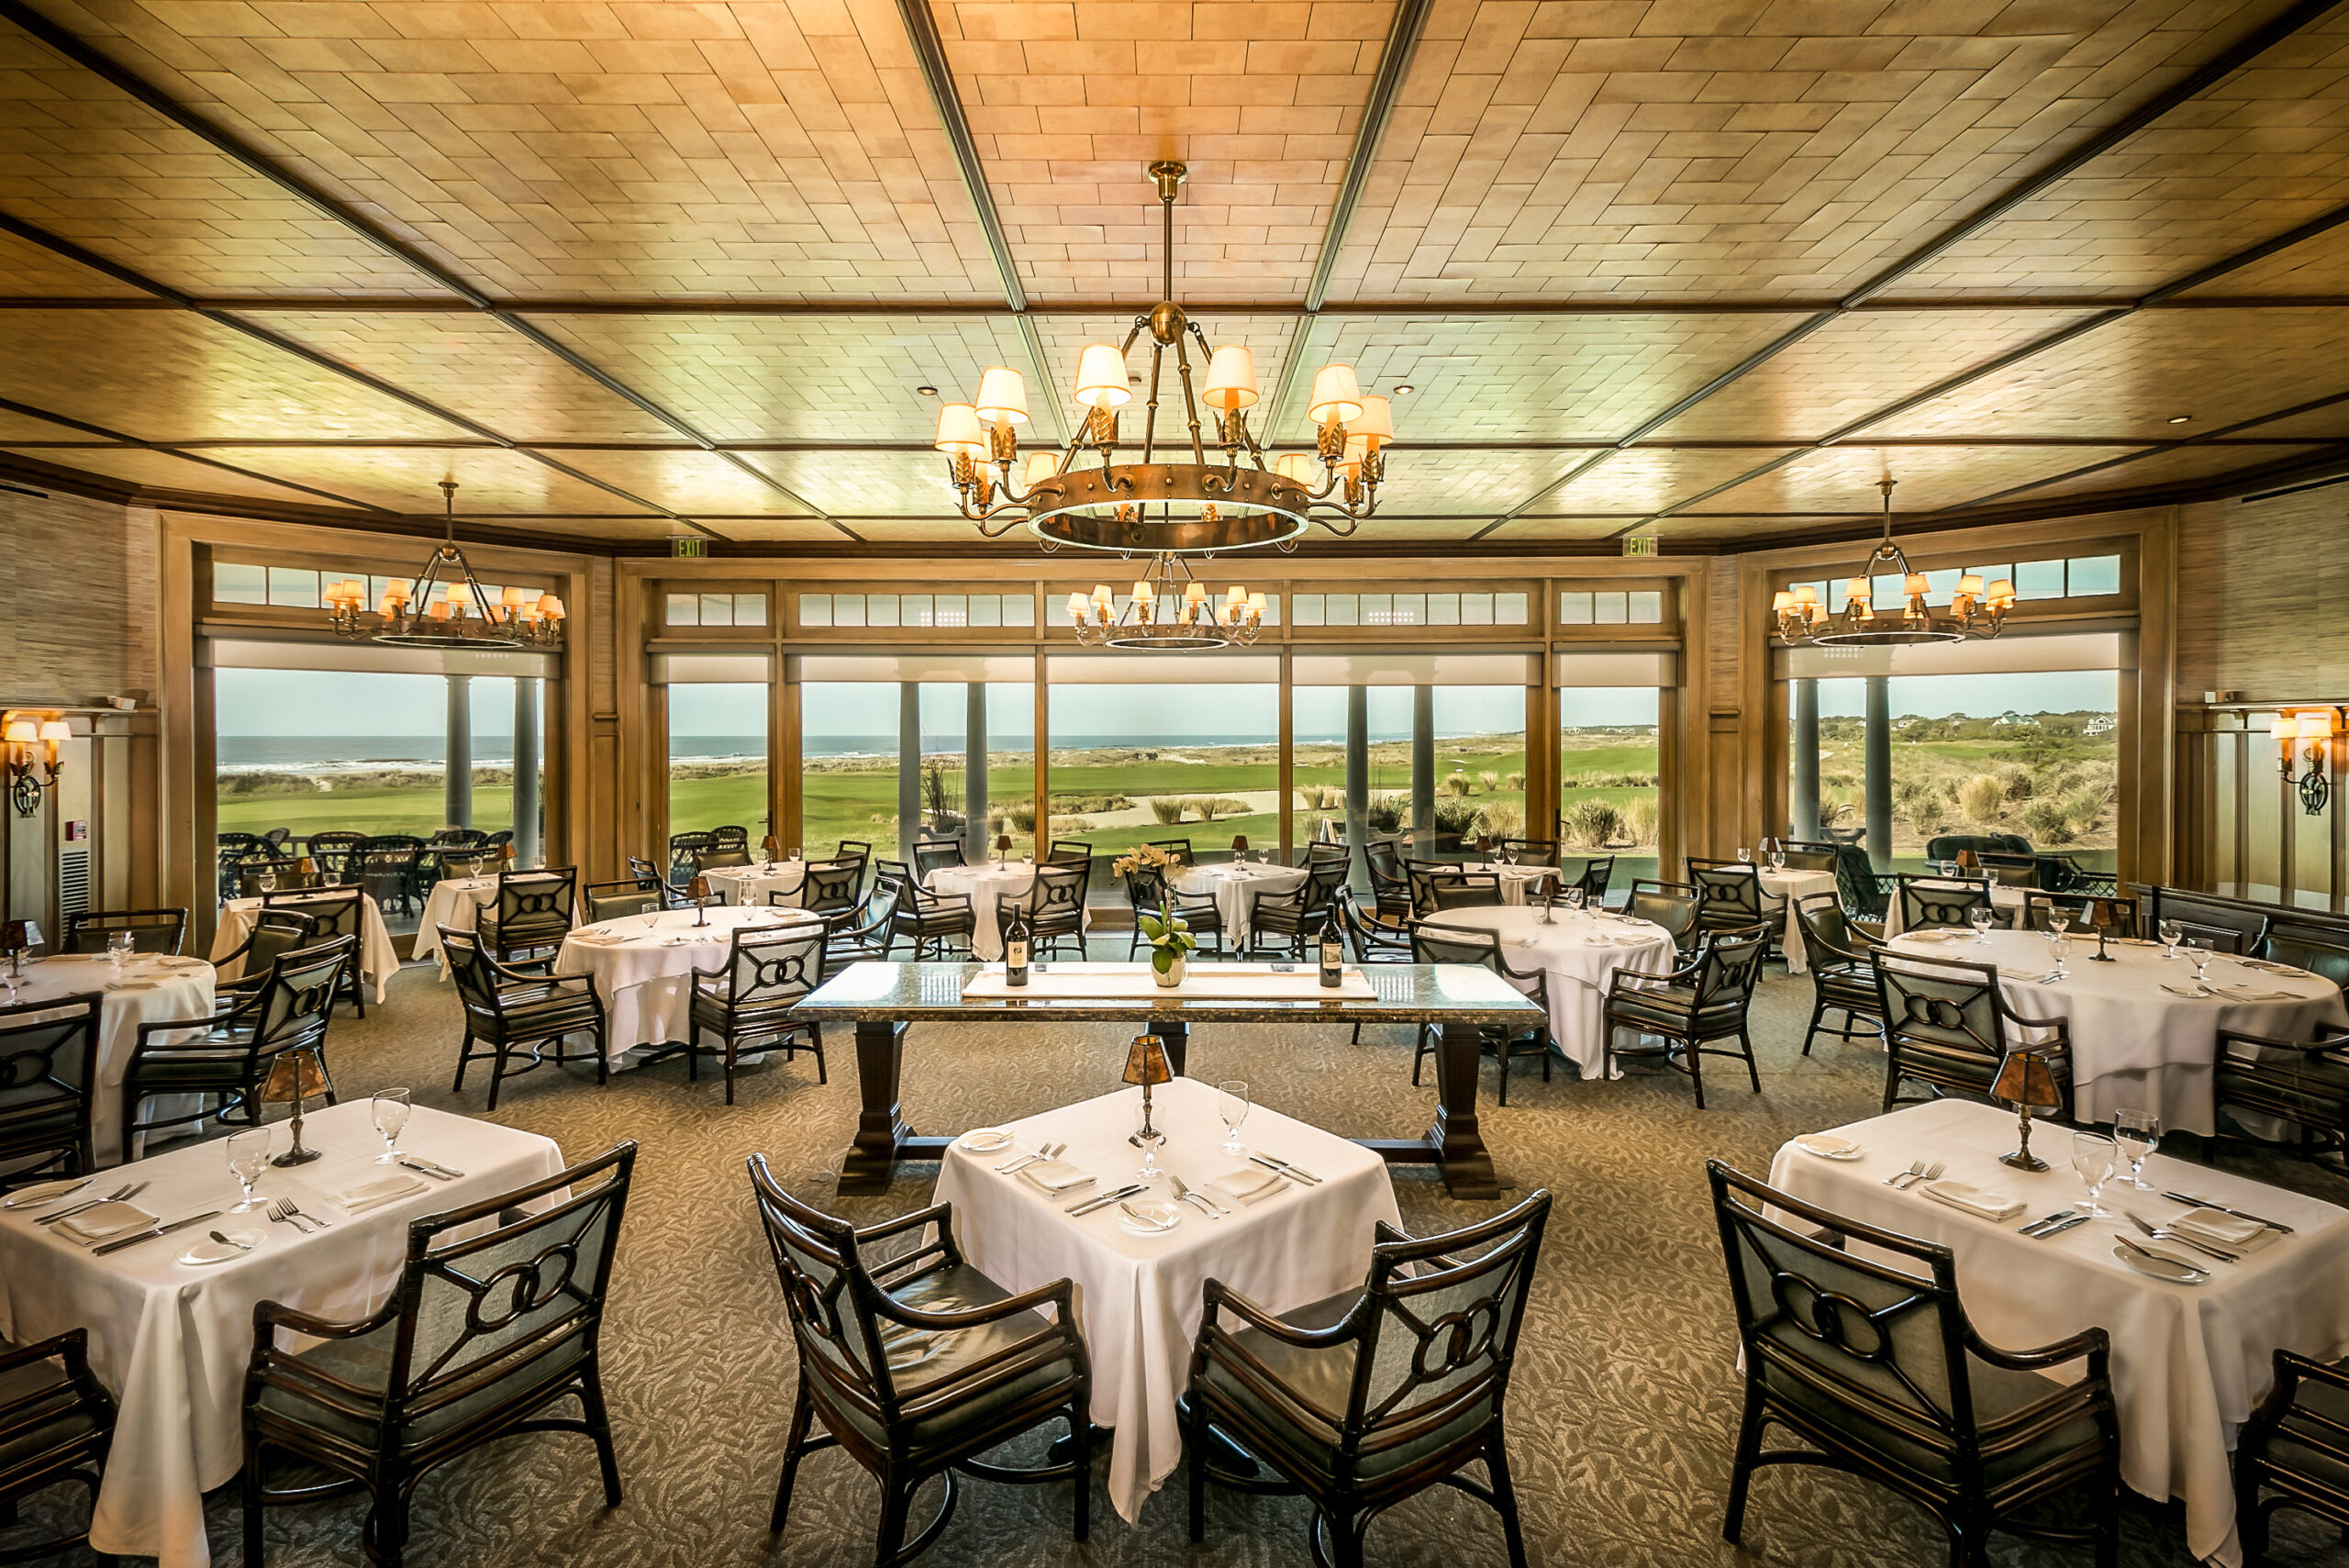 The Atlantic Room restaurant in The Ocean Course Clubhouse at Kiawah Island Golf Resort